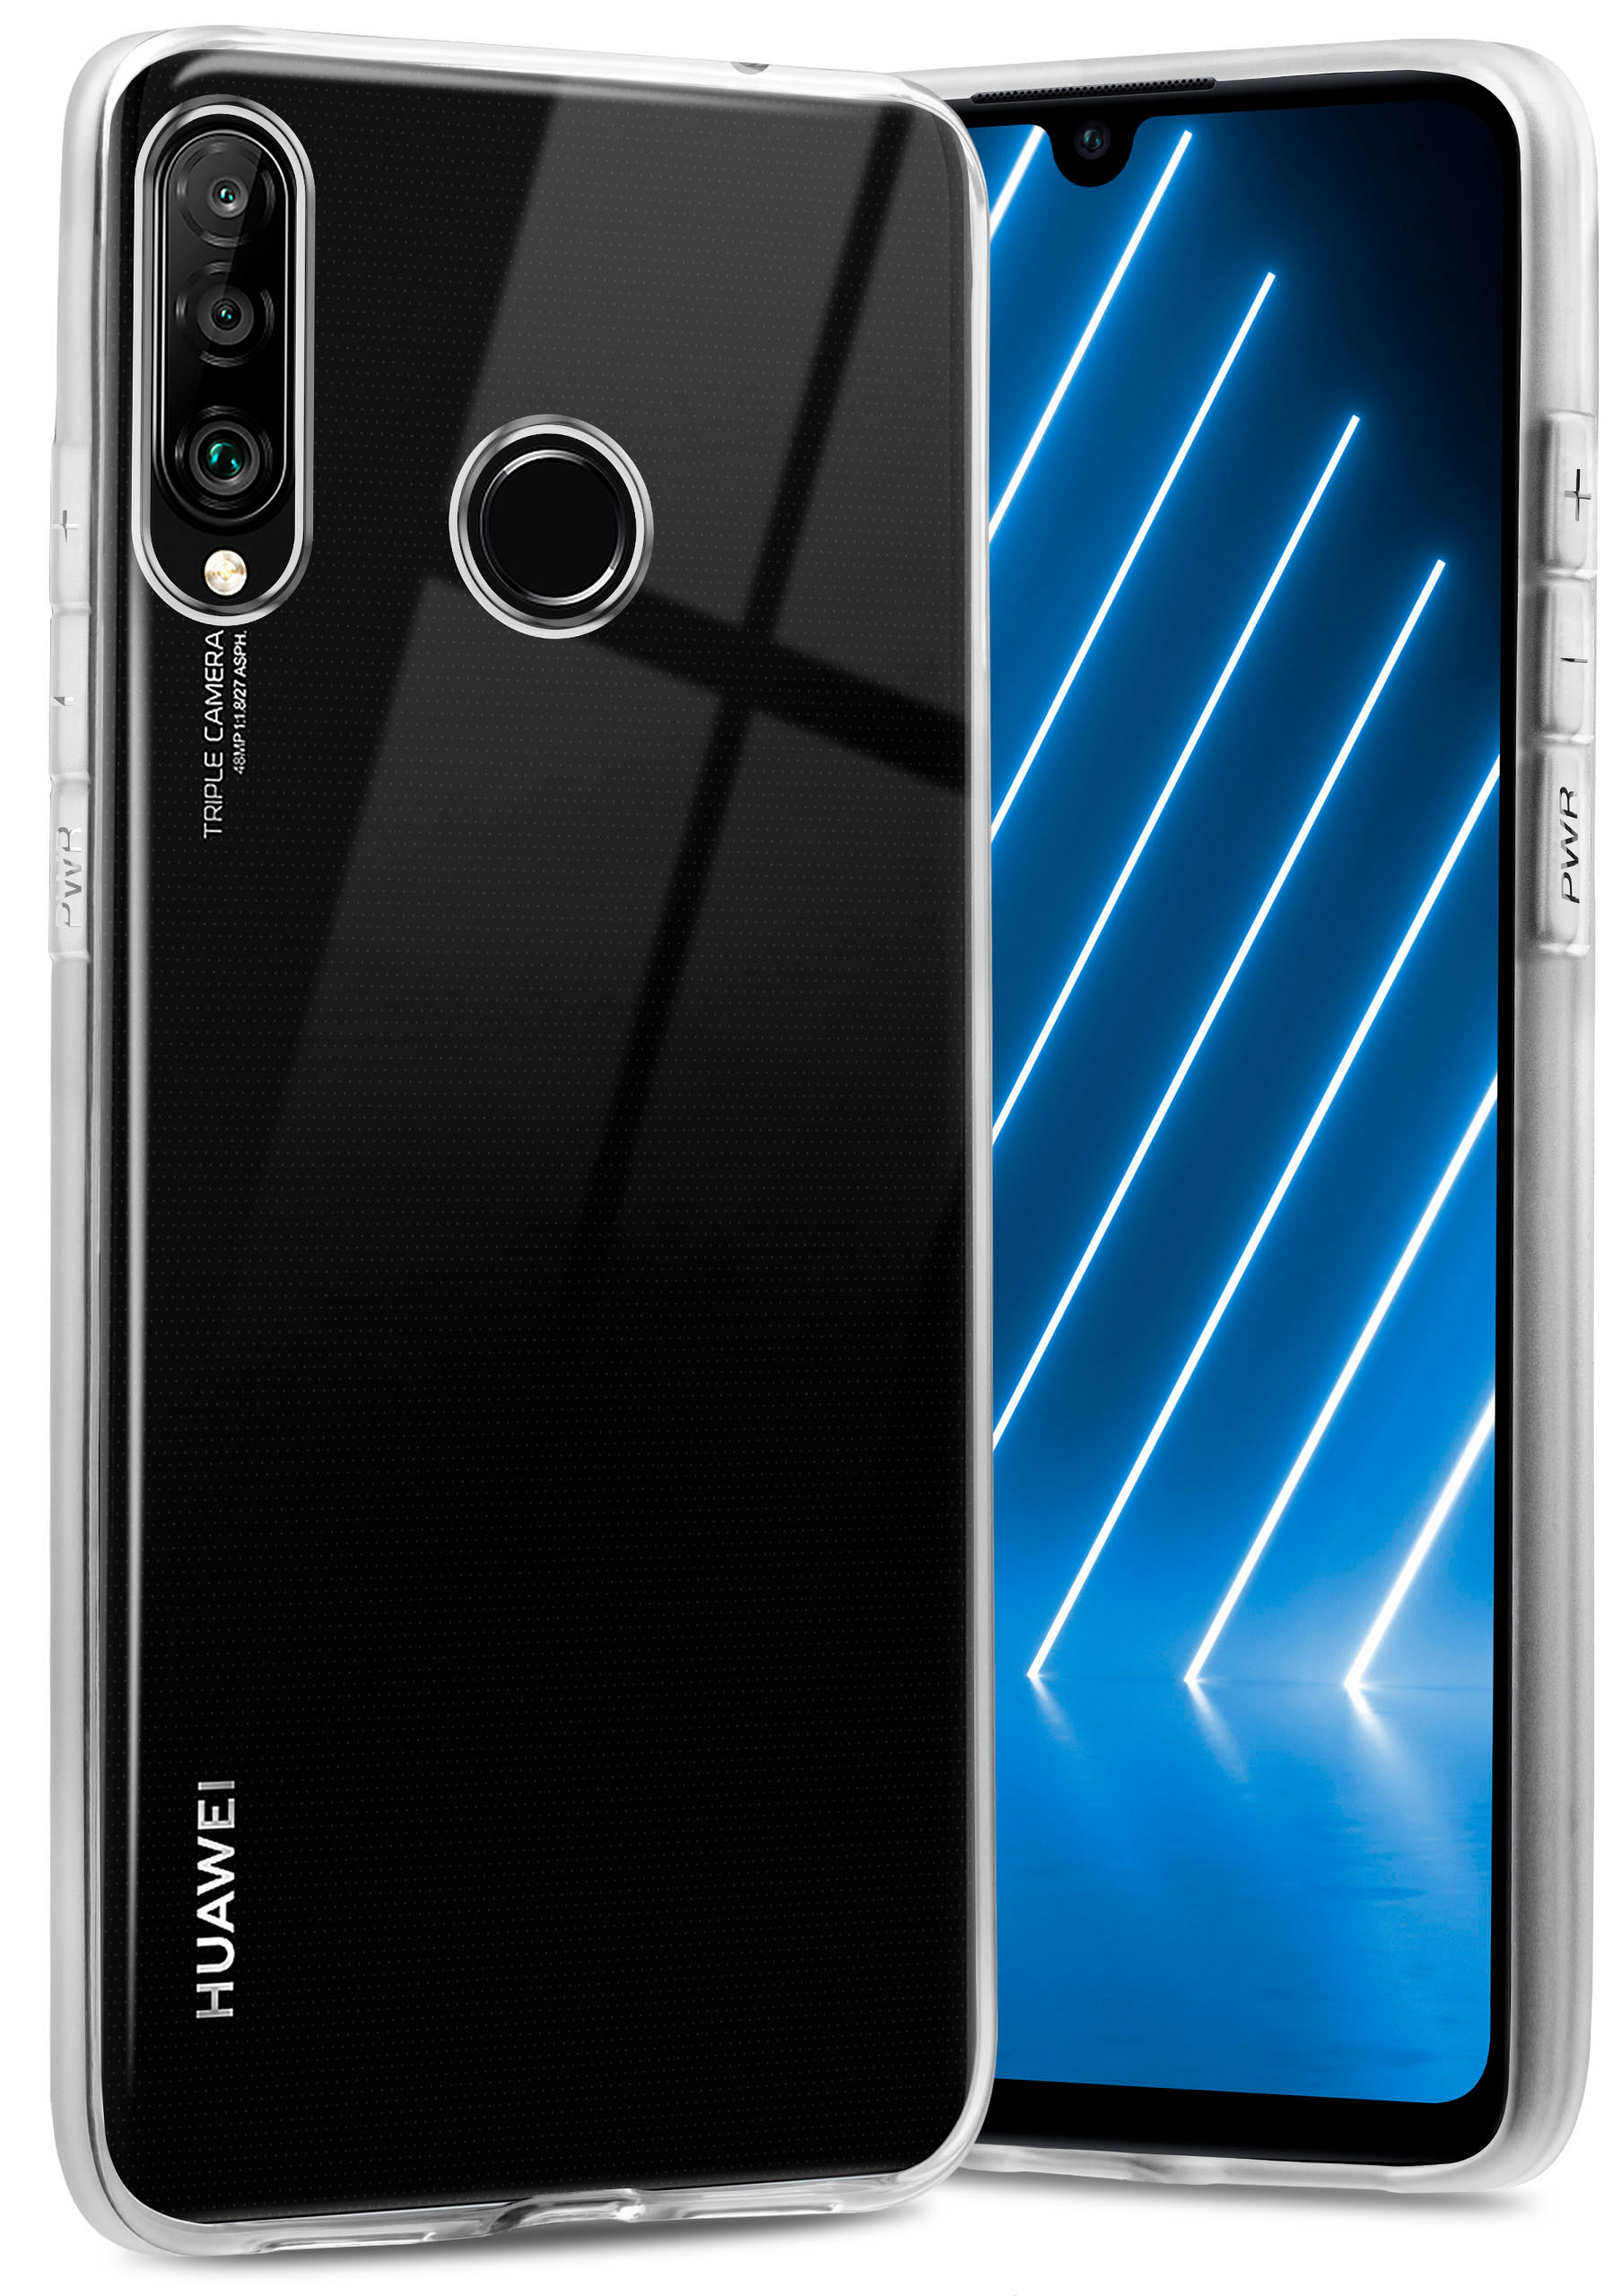 P30 Crystal-Clear Lite/P30 Lite Backcover, Huawei, New, Clear ONEFLOW Case,